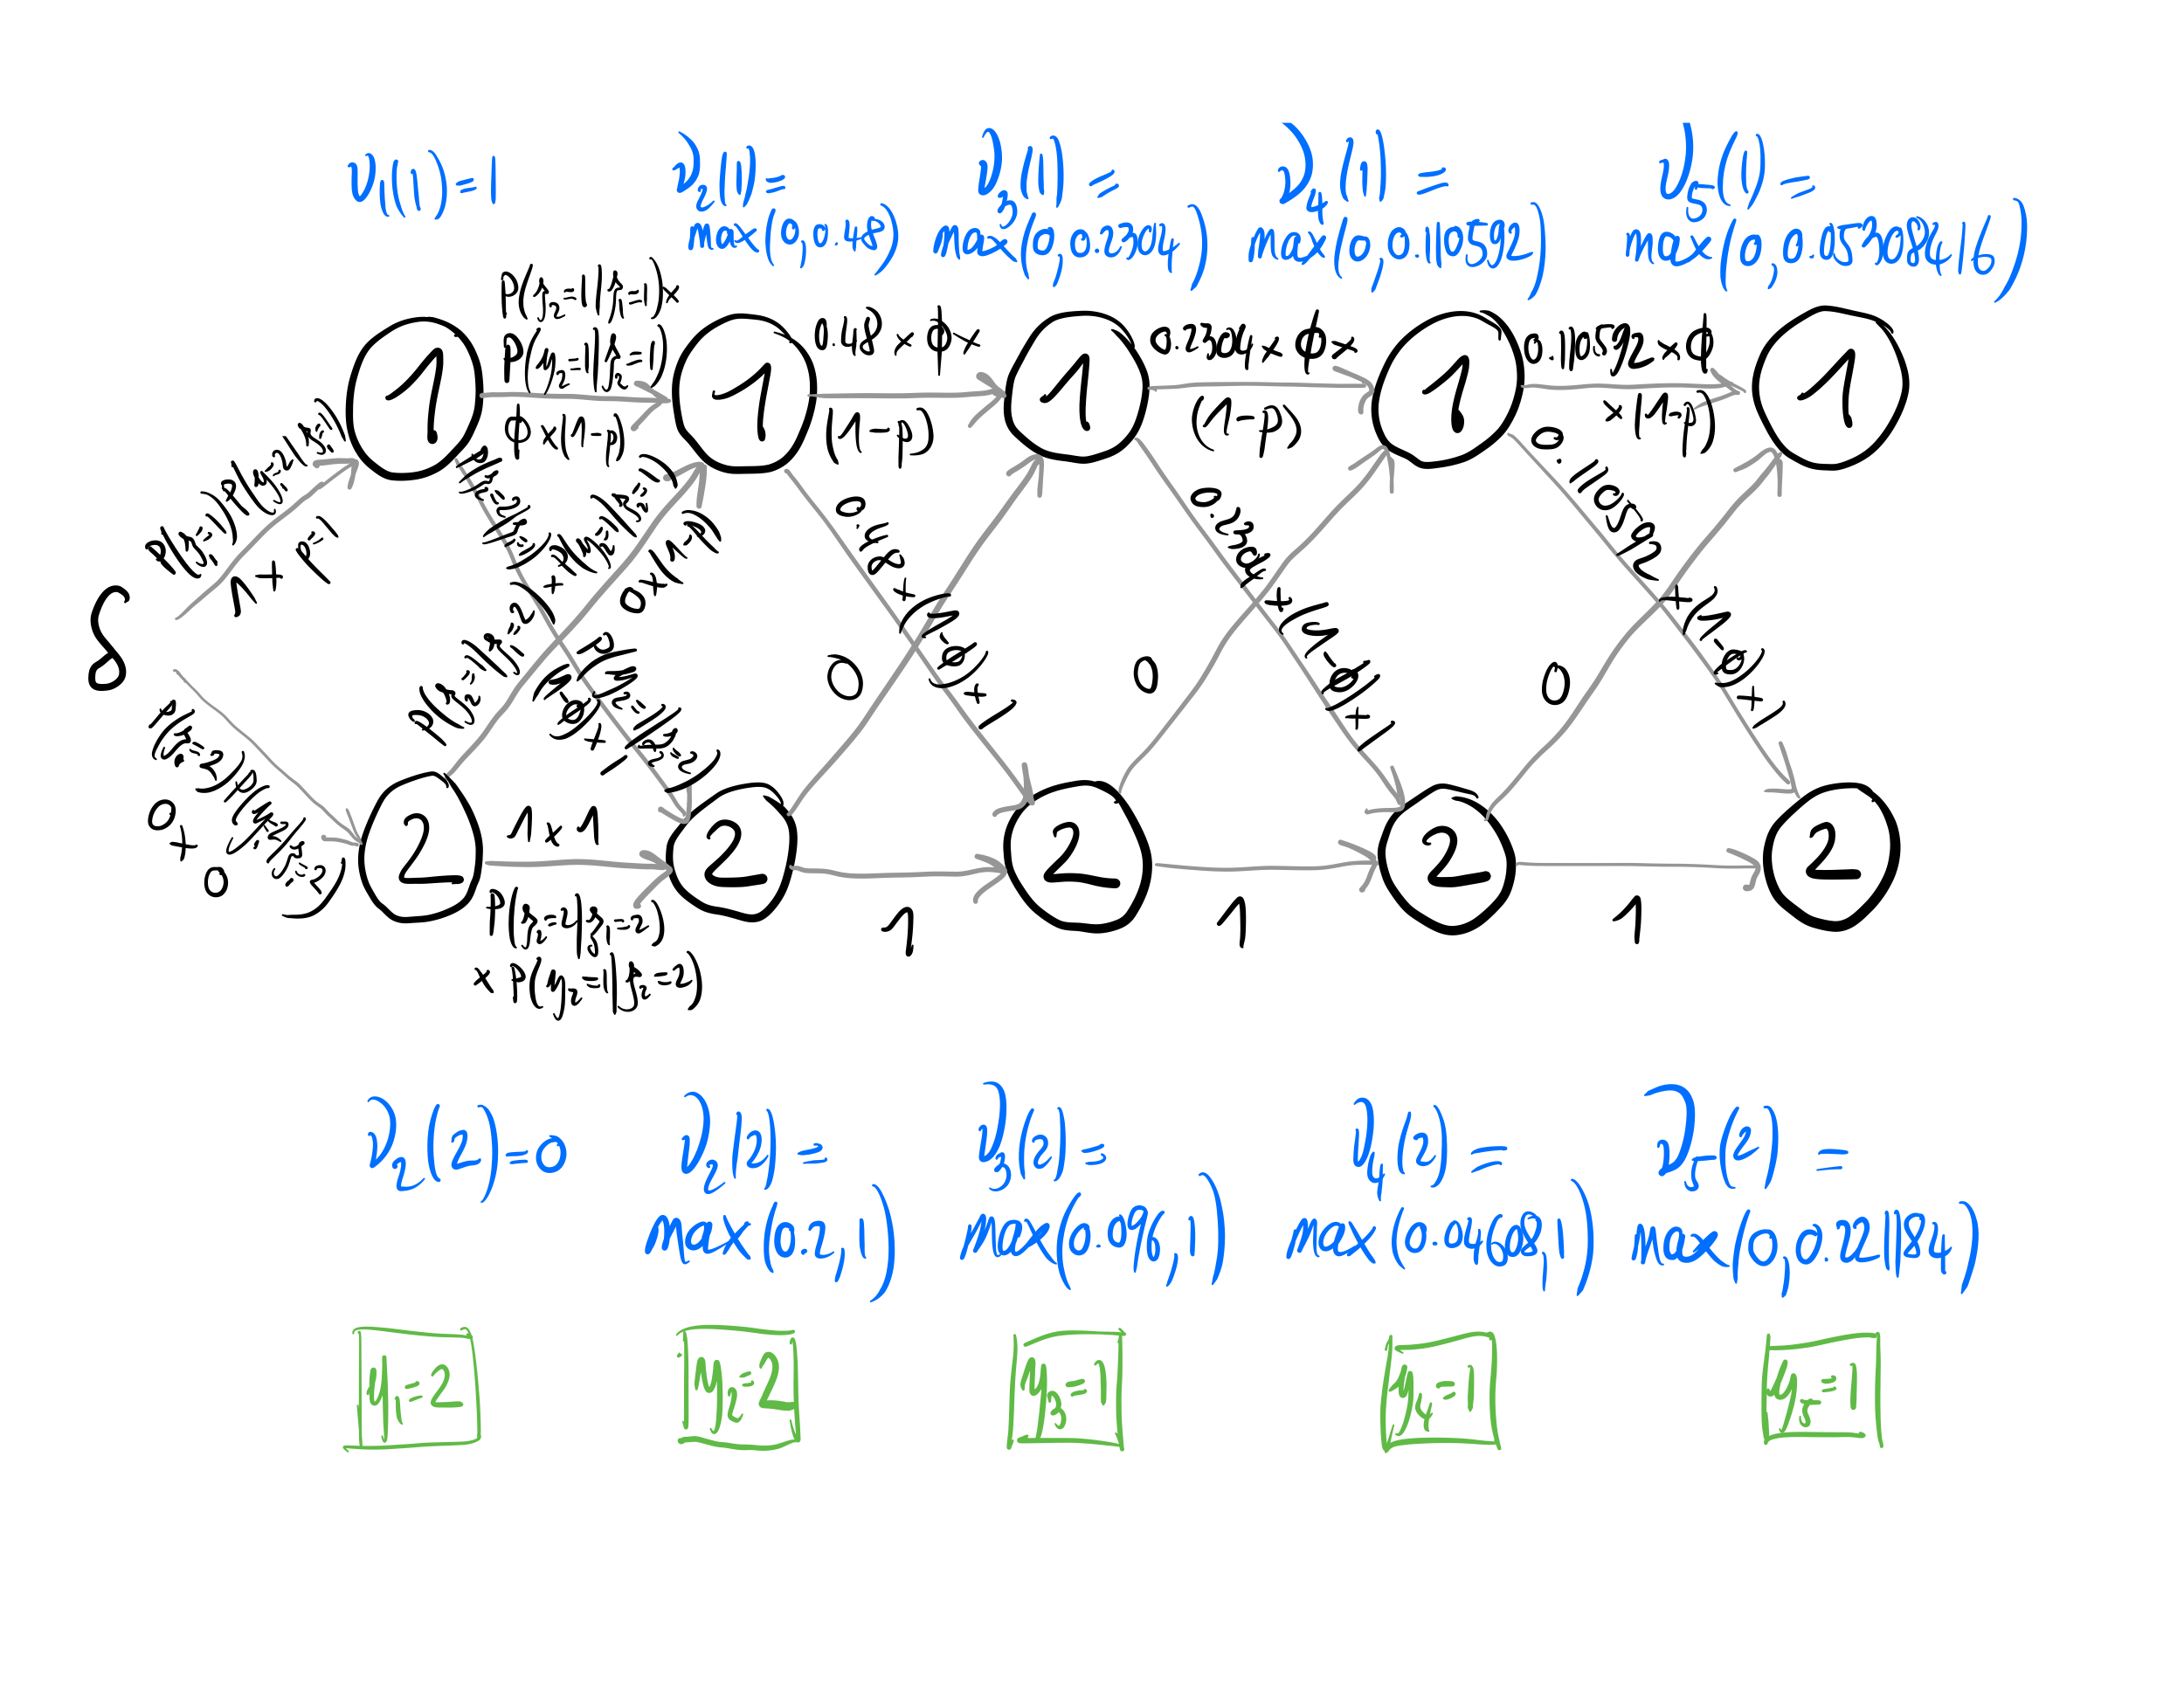 Graphical representation of the Viterbi algorithm with $\phi = 0.8$ and $p = 0.6$. States are alive $z = 1$ or dead $z = 2$ and observations are non-detected $y = 1$ or detected $y = 2$. To be done properly w/ tikz.